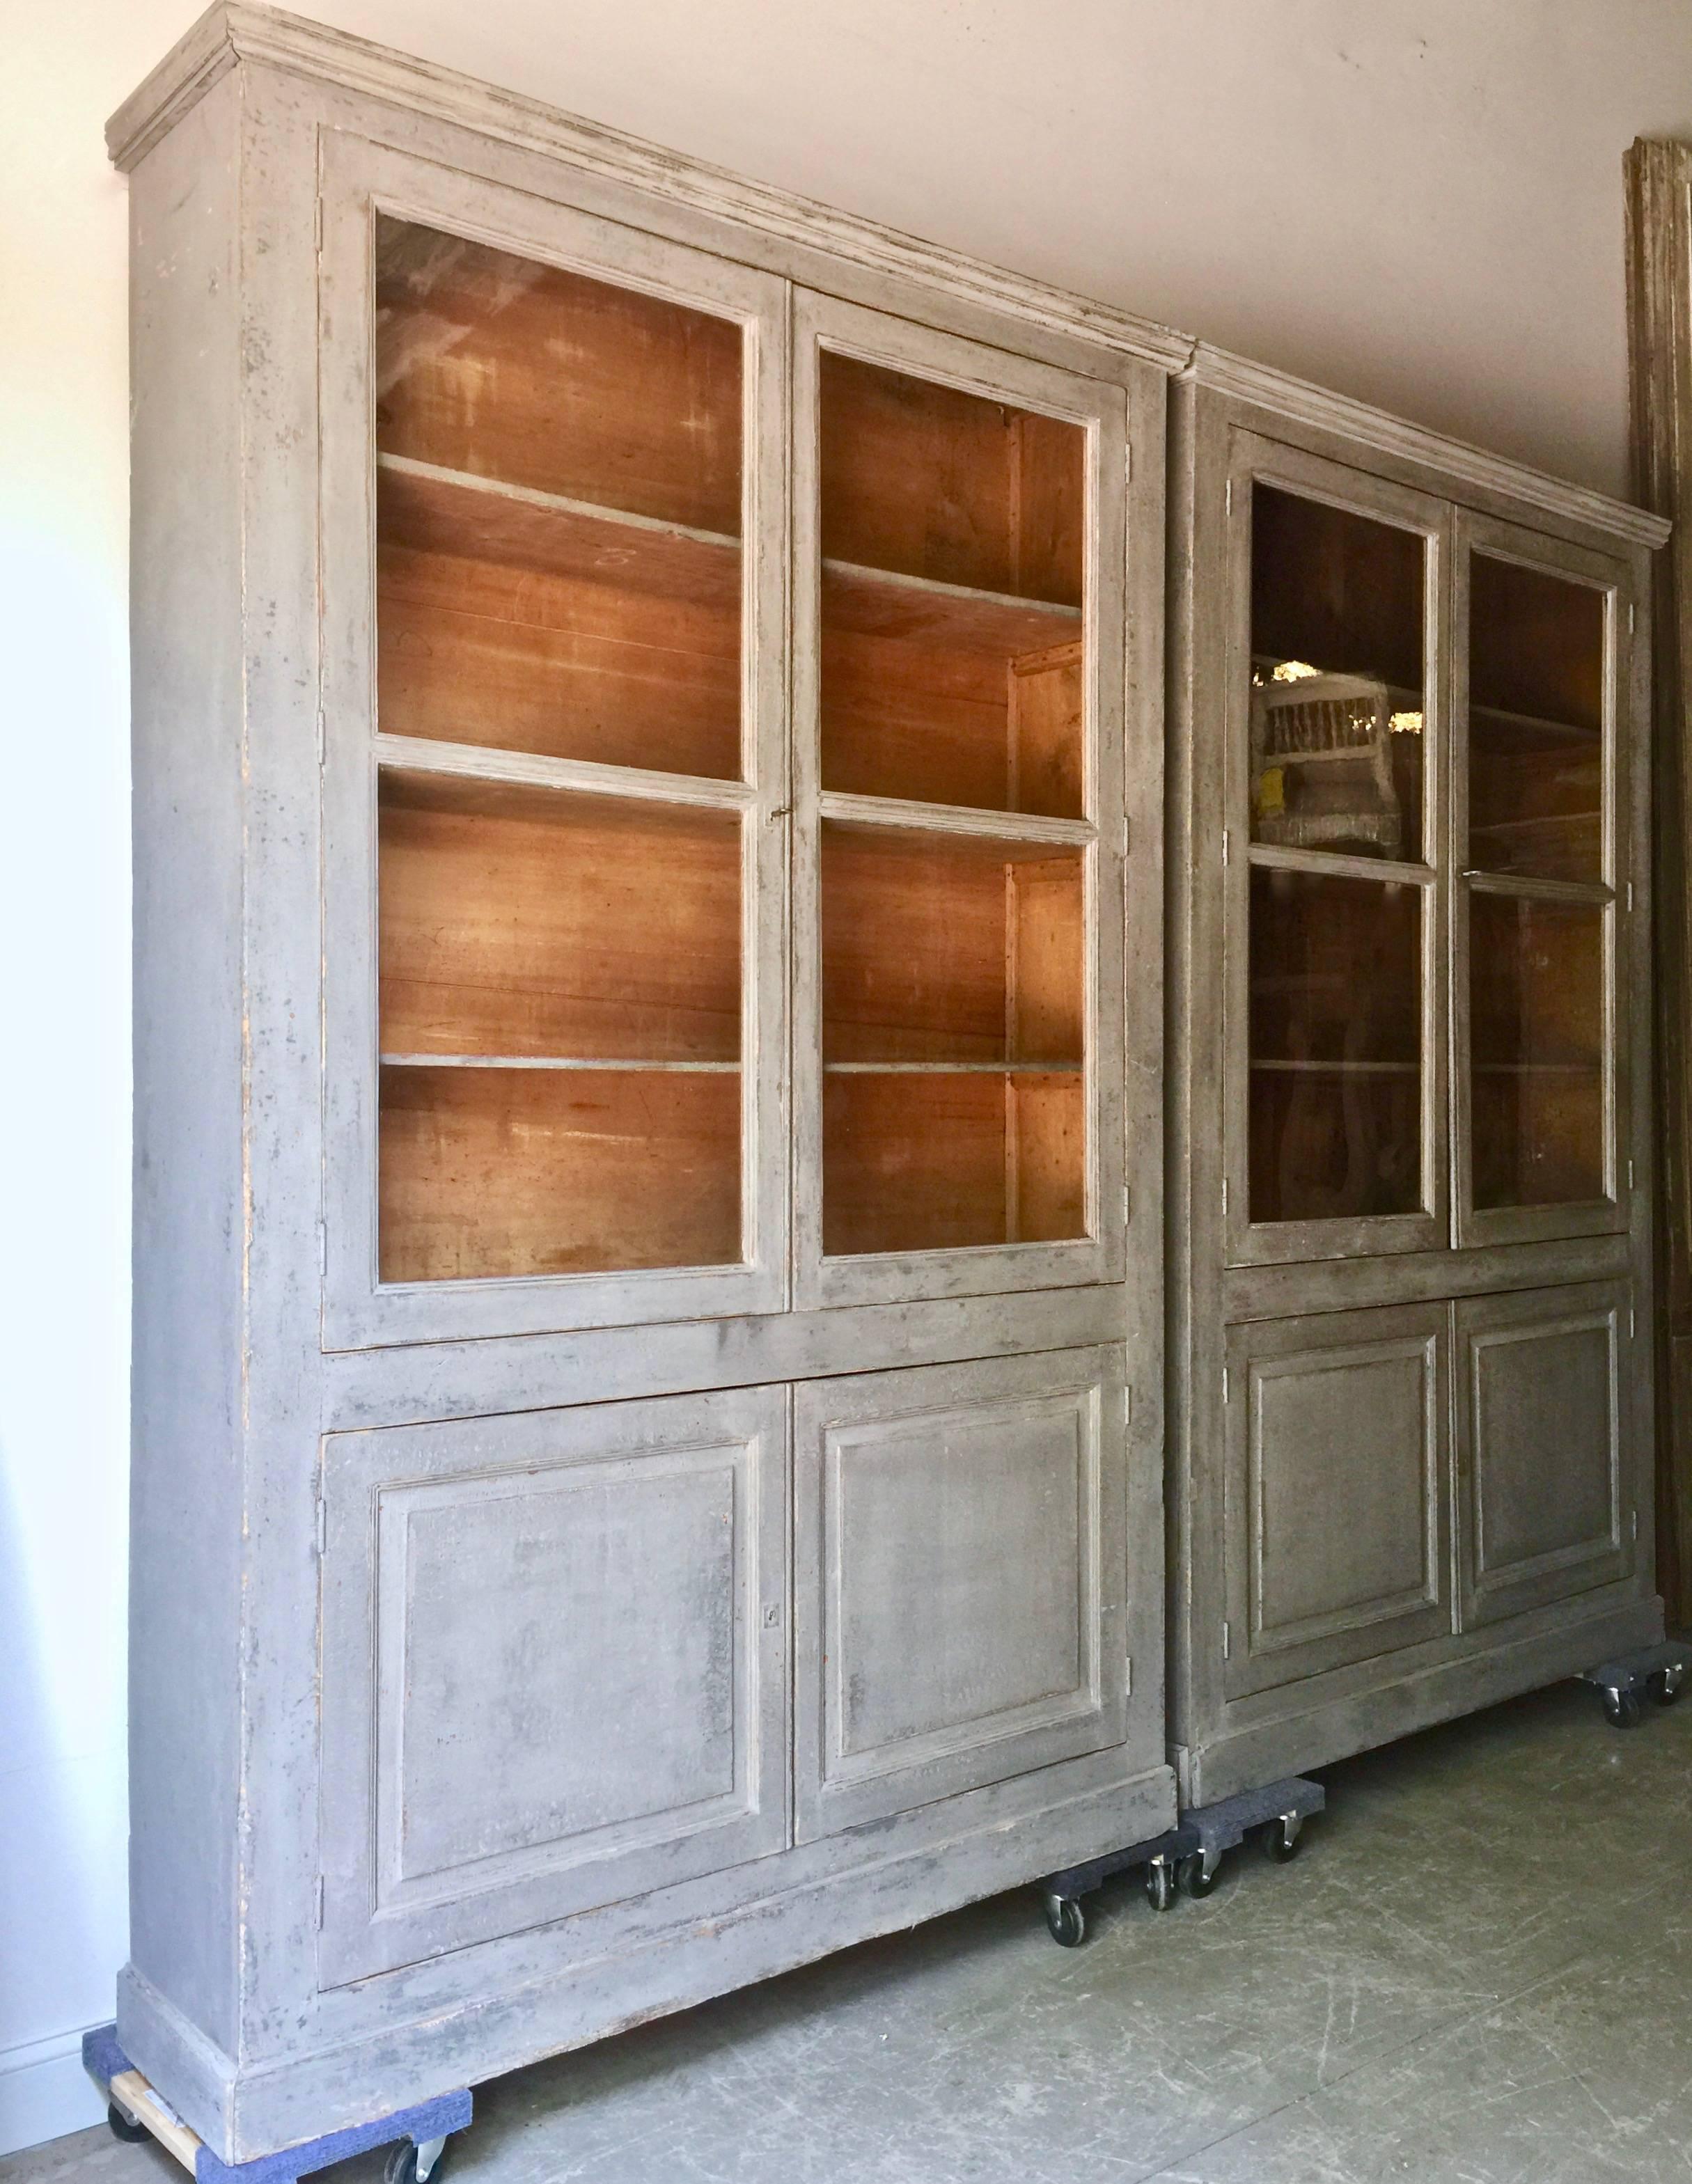 A pair of very large 19th century painted Bibliothèques from France. The glazed top panels have their most original glasses and the bases are with fielded panels. Inside four fixed shelves. Very simple, handsome library bookcases.
Here are few